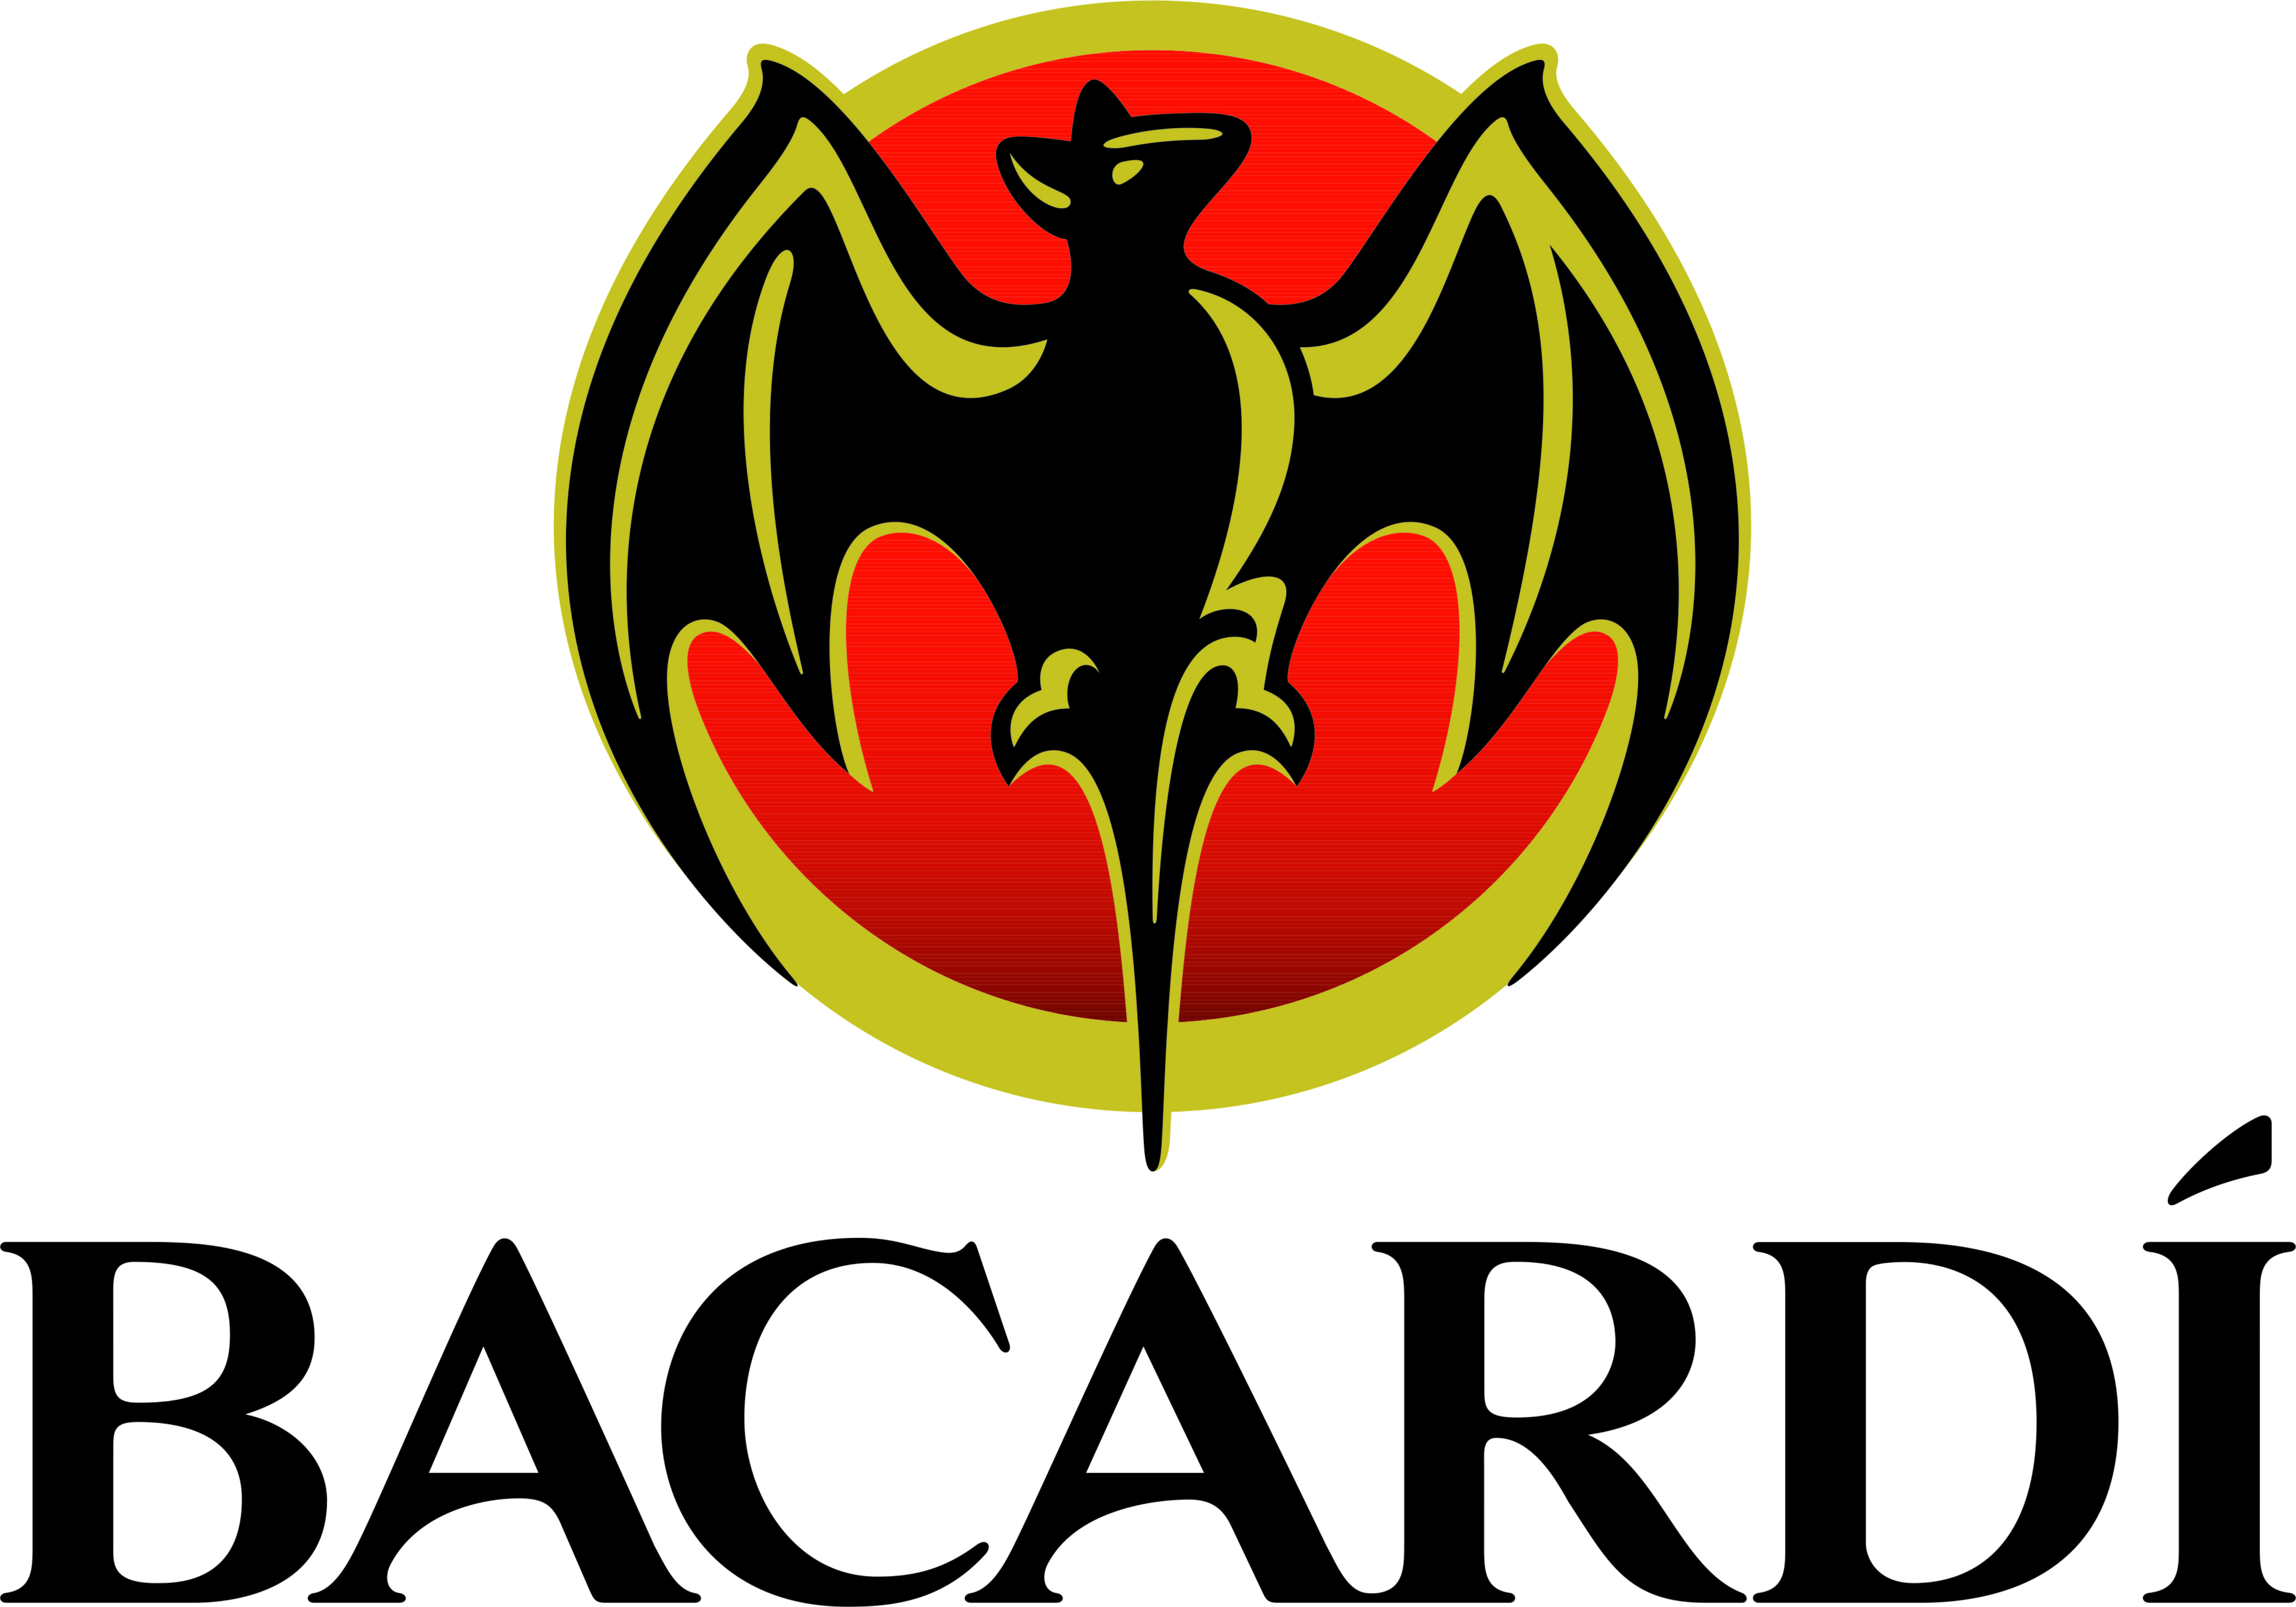 products, bacardi